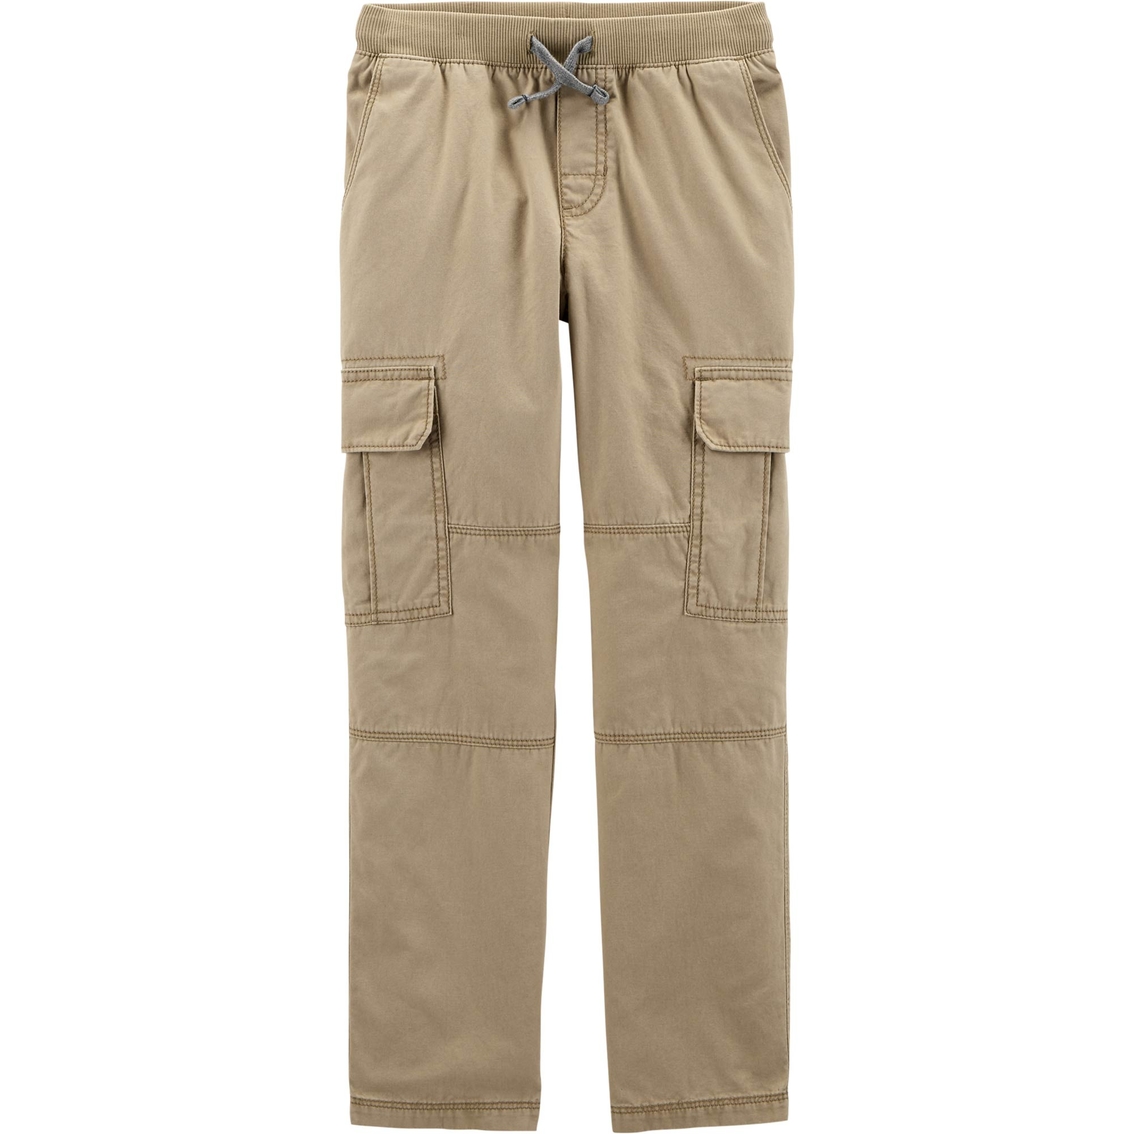 Carter's Boys Pull On Reinforced Knee Pants, Size 8 | Atg Archive ...